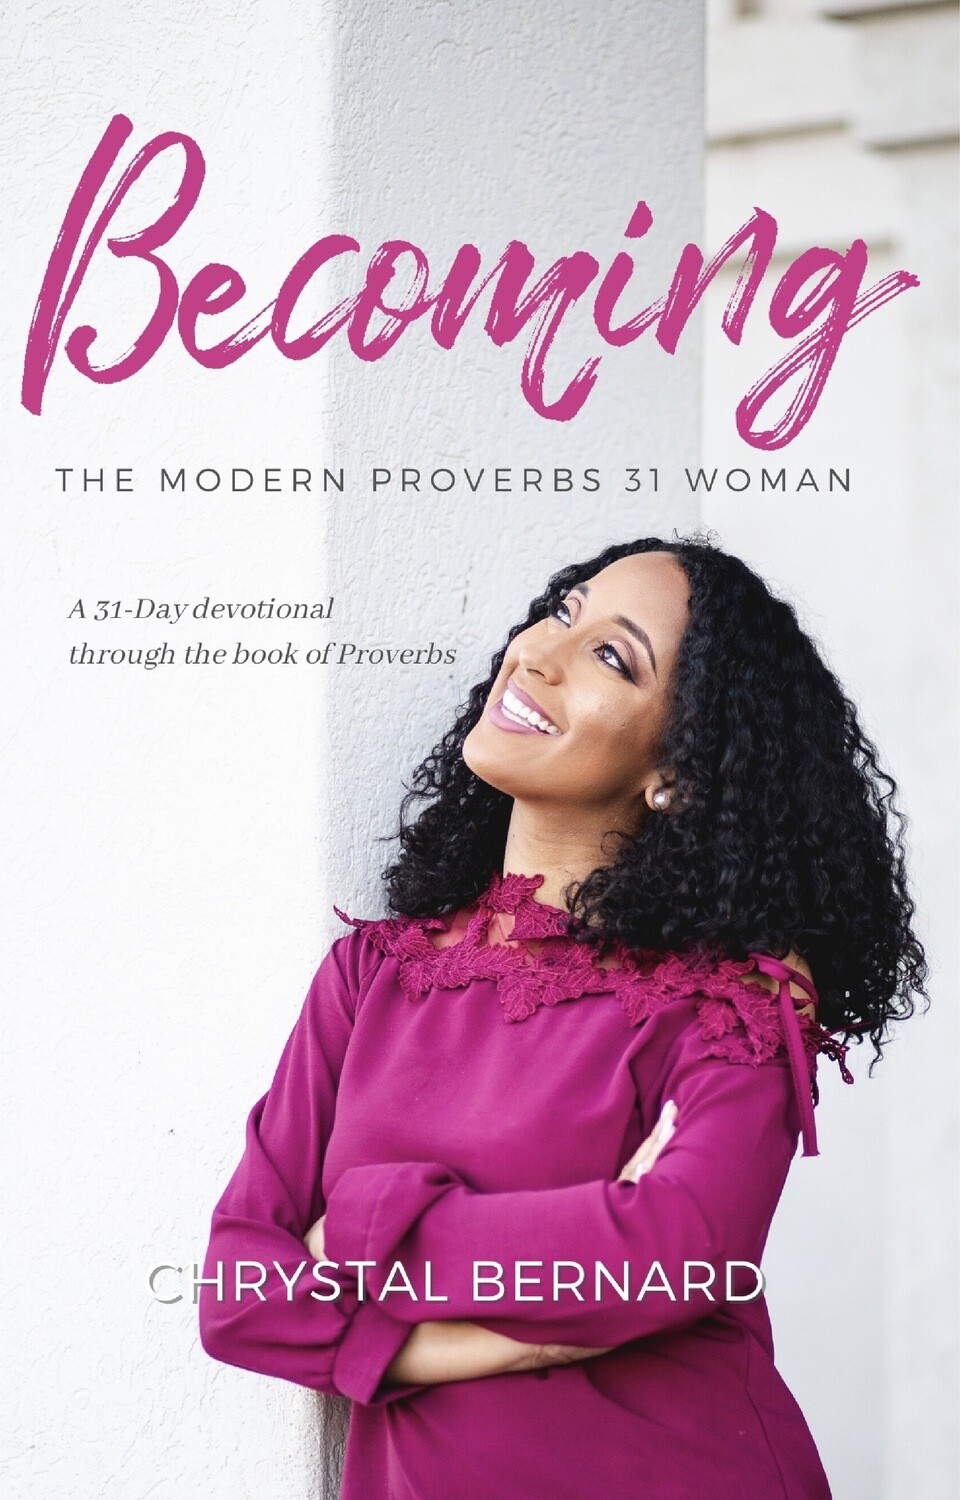 Becoming the Modern Proverbs 31 Woman: A 31-Day devotional through the book of Proverbs